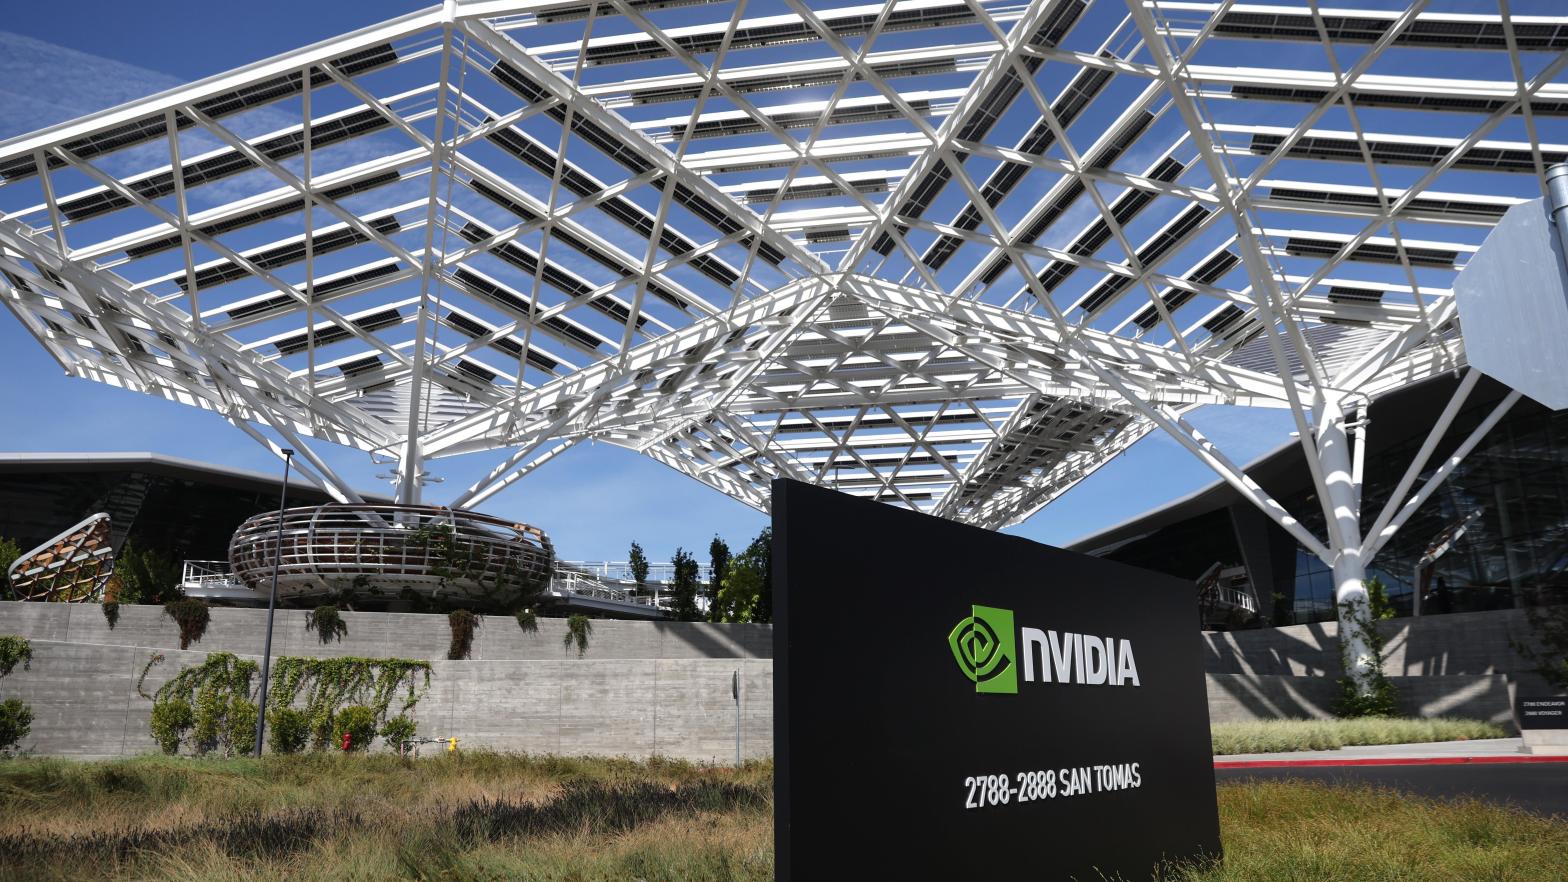 Nvidia has struggled in recent months due to lagging sales and the ongoing chip shortage, but now U.S. export restrictions aren't making things any easier. (Photo: Justin Sullivan, Getty Images)